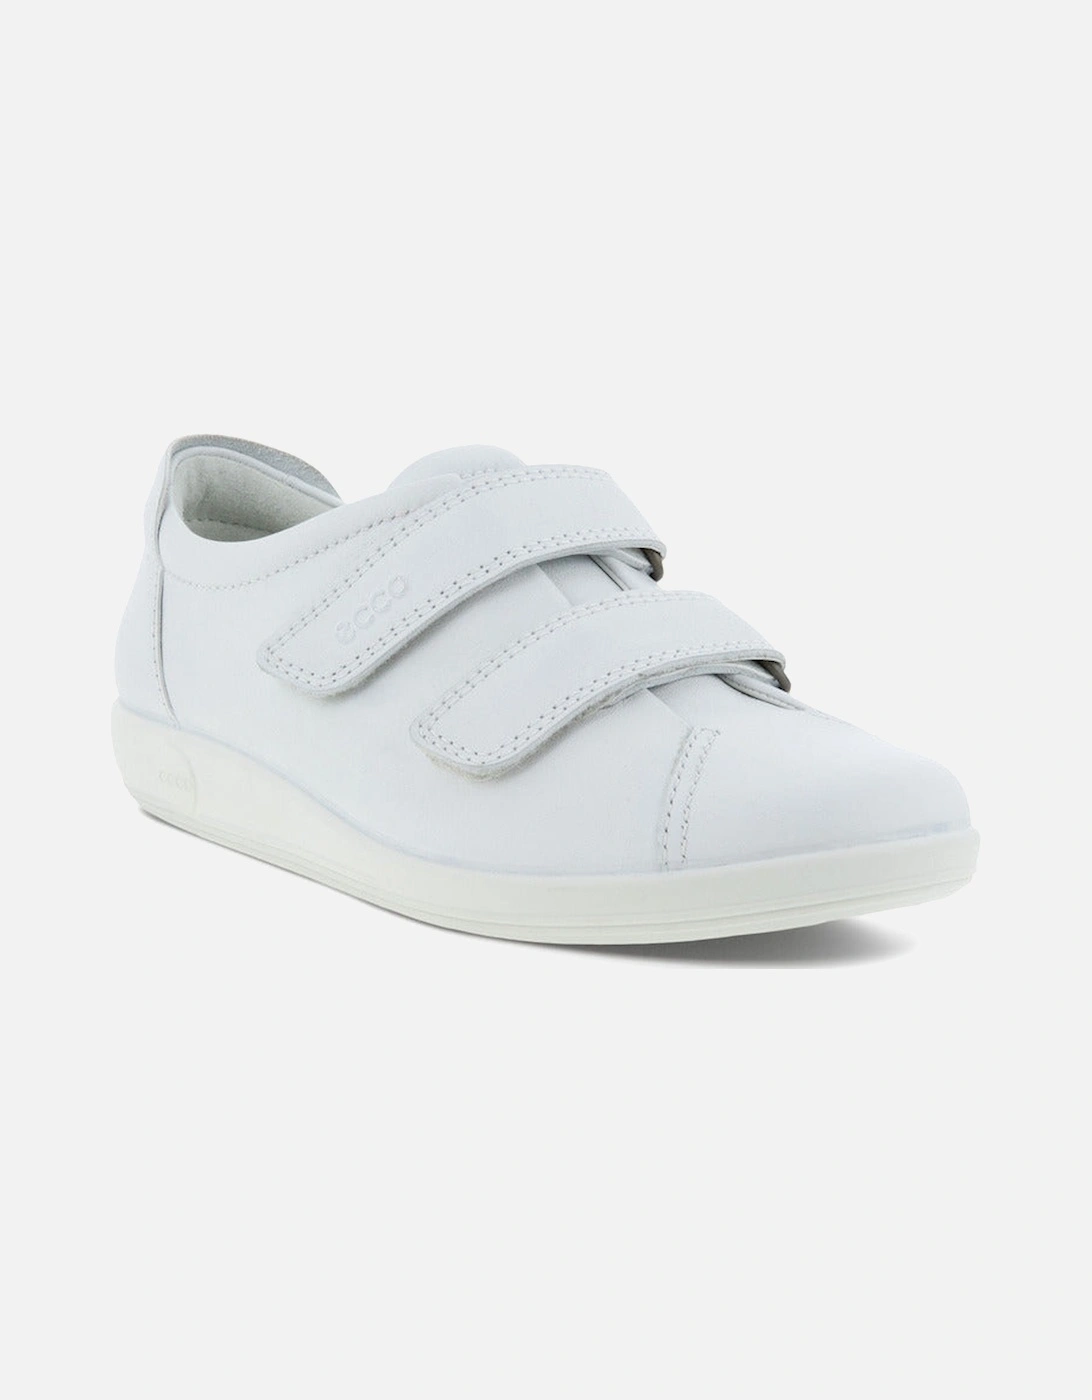 Womens Soft 20. 206513 01002 in white leather, 2 of 1